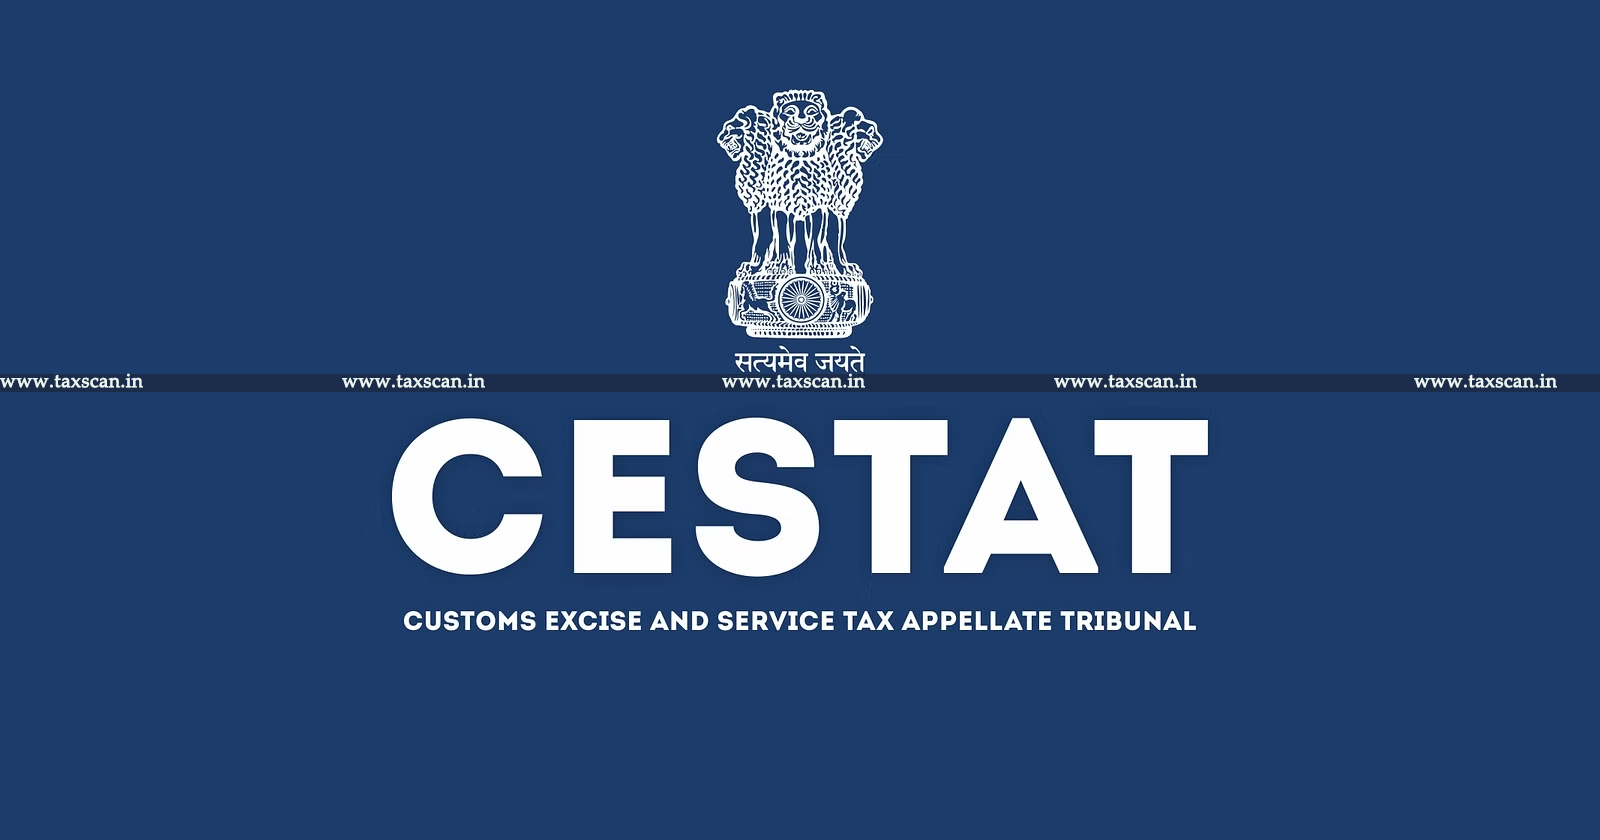 Appeal filed beyond Condonable Period - Appeal filed - Appeal - Customs Act - CESTAT dismisses Appeal - taxscan